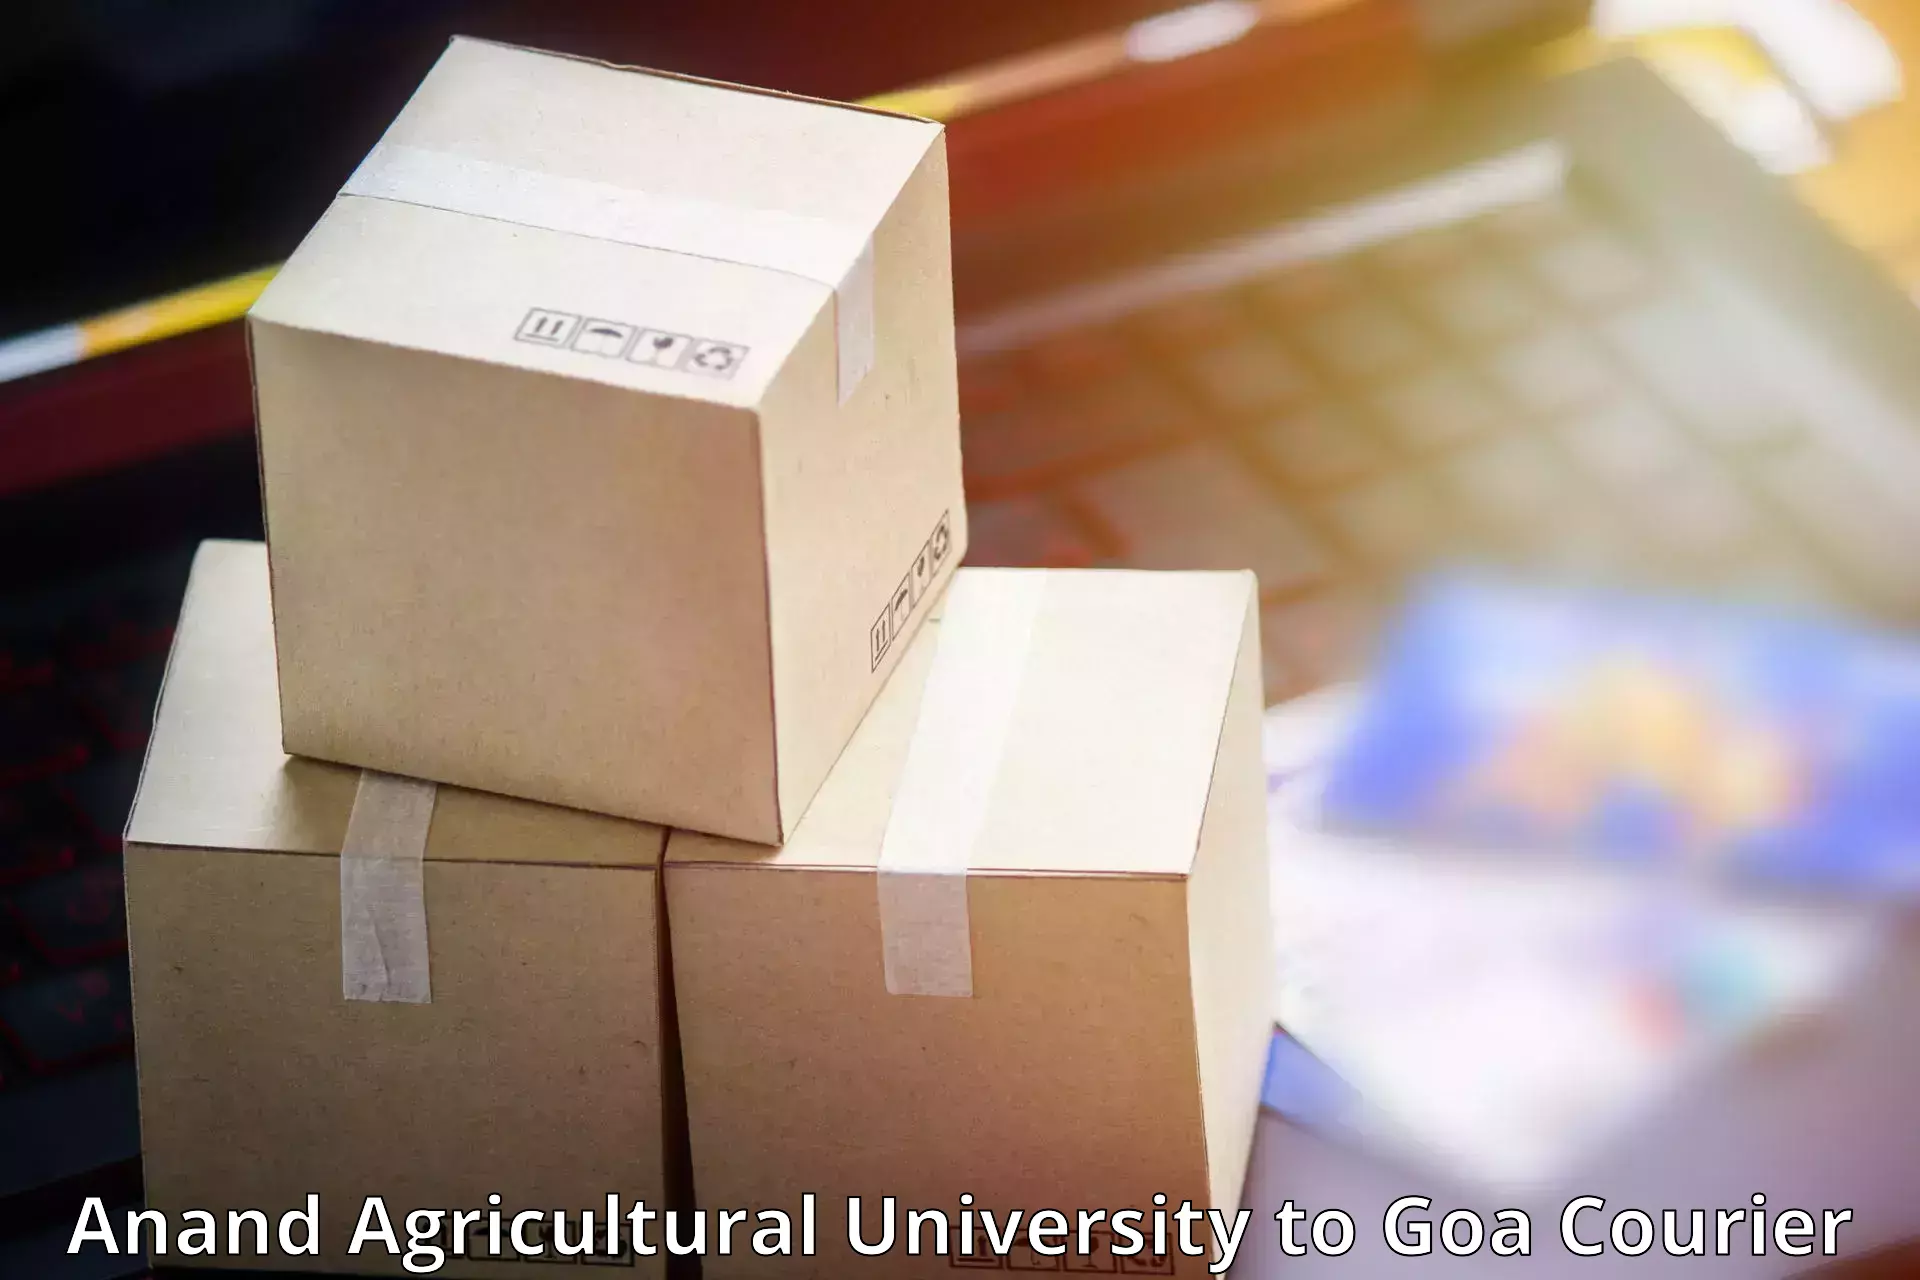 Express logistics service in Anand Agricultural University to Goa